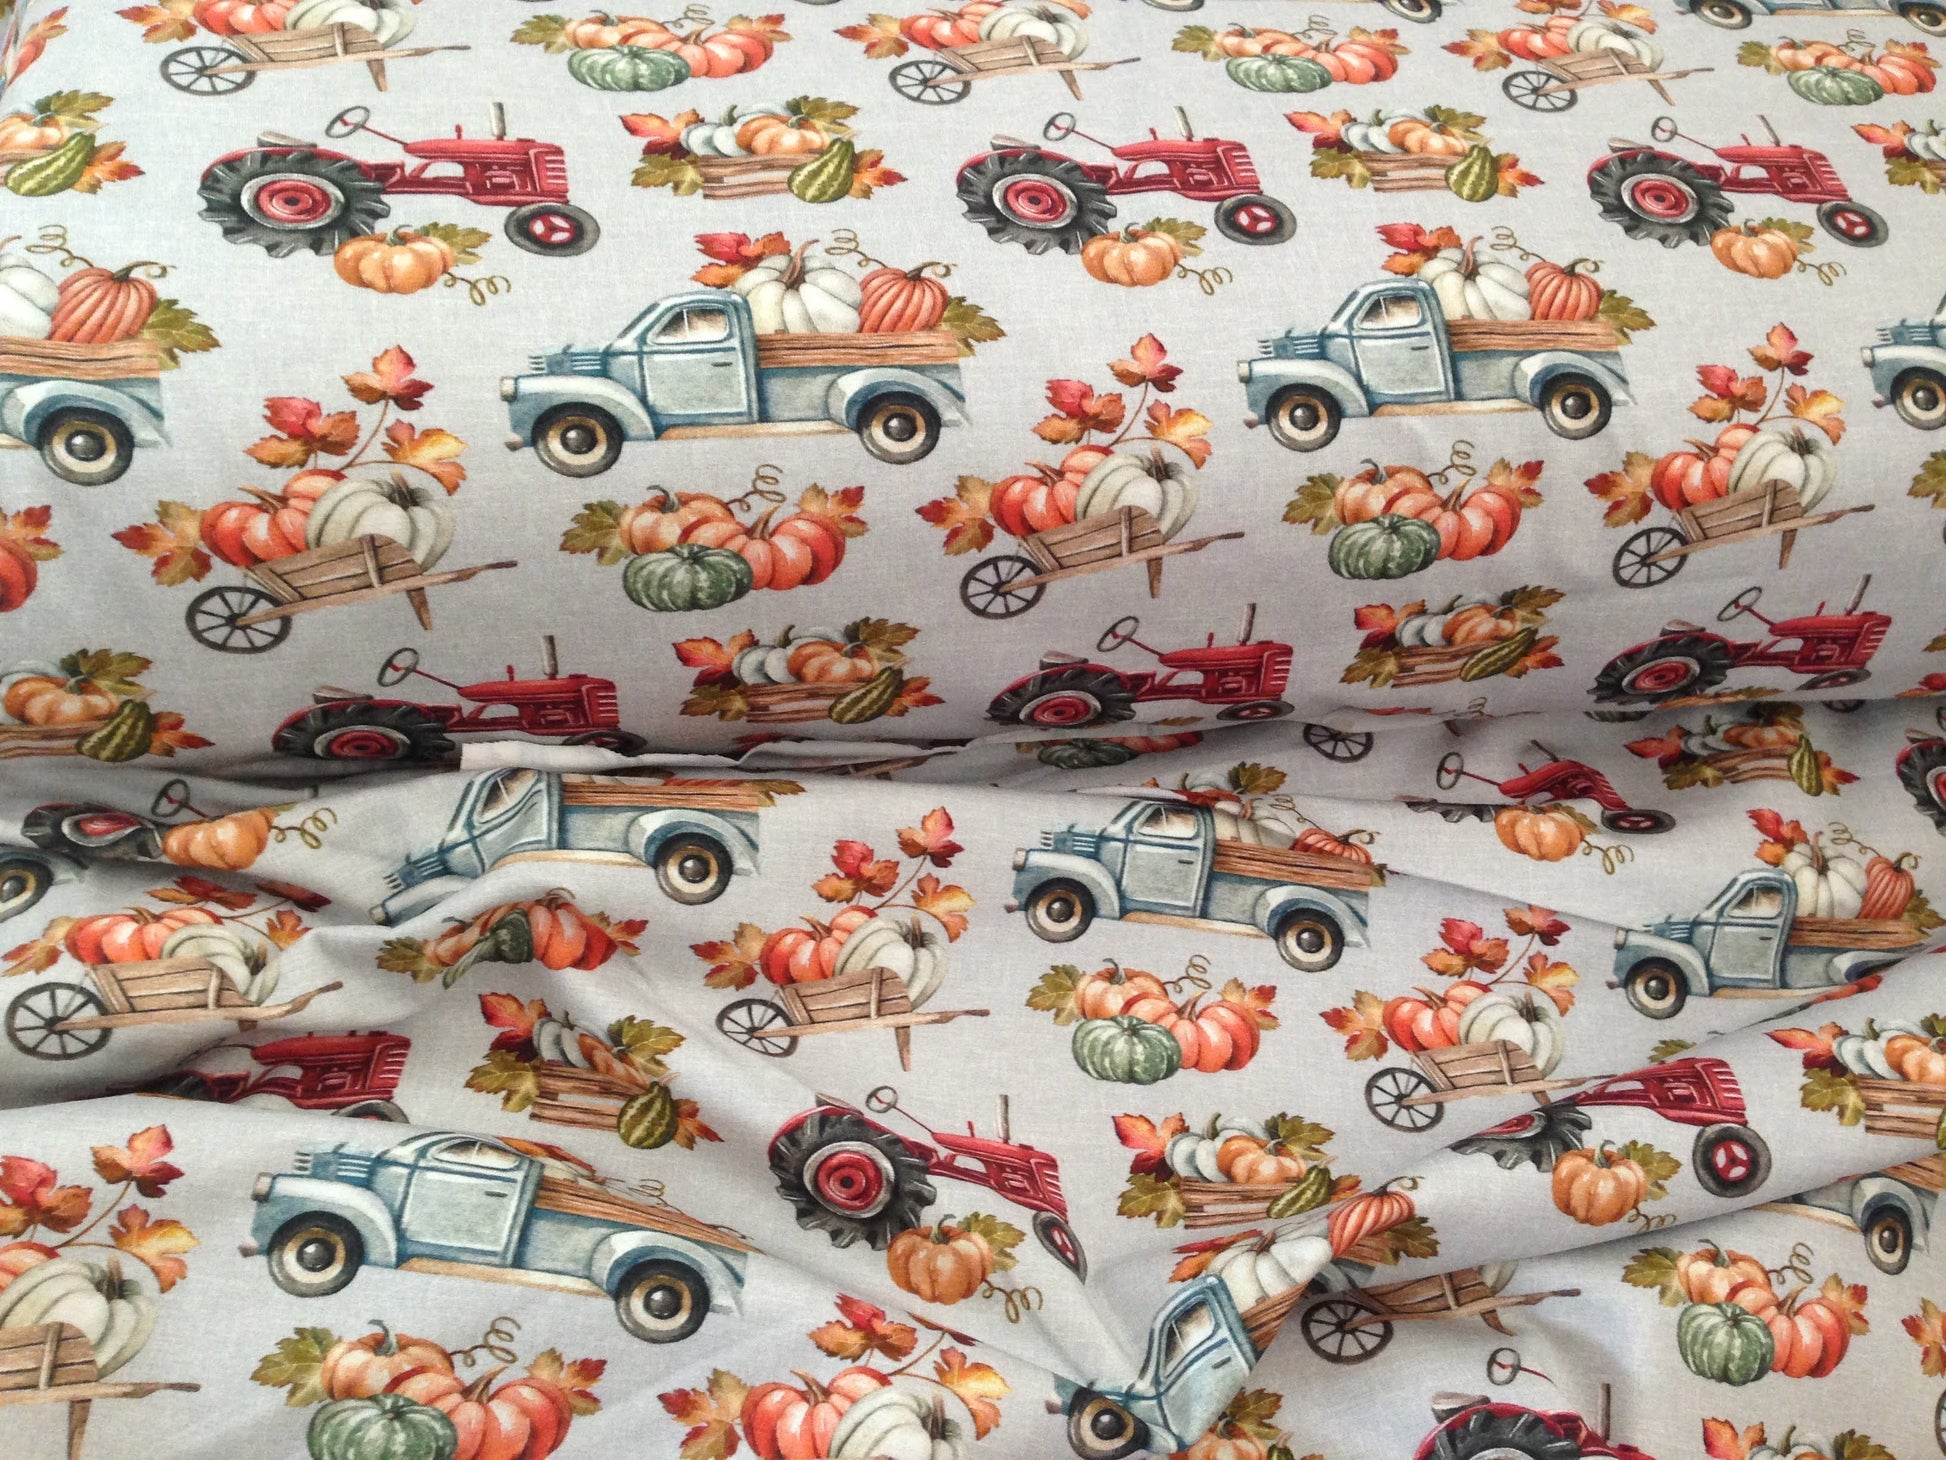 Organic jersey fabric with grey burlap cloth optic background and trucks, tractors, wheelbarrows and wooden boxes filled with pumpkins pattern.